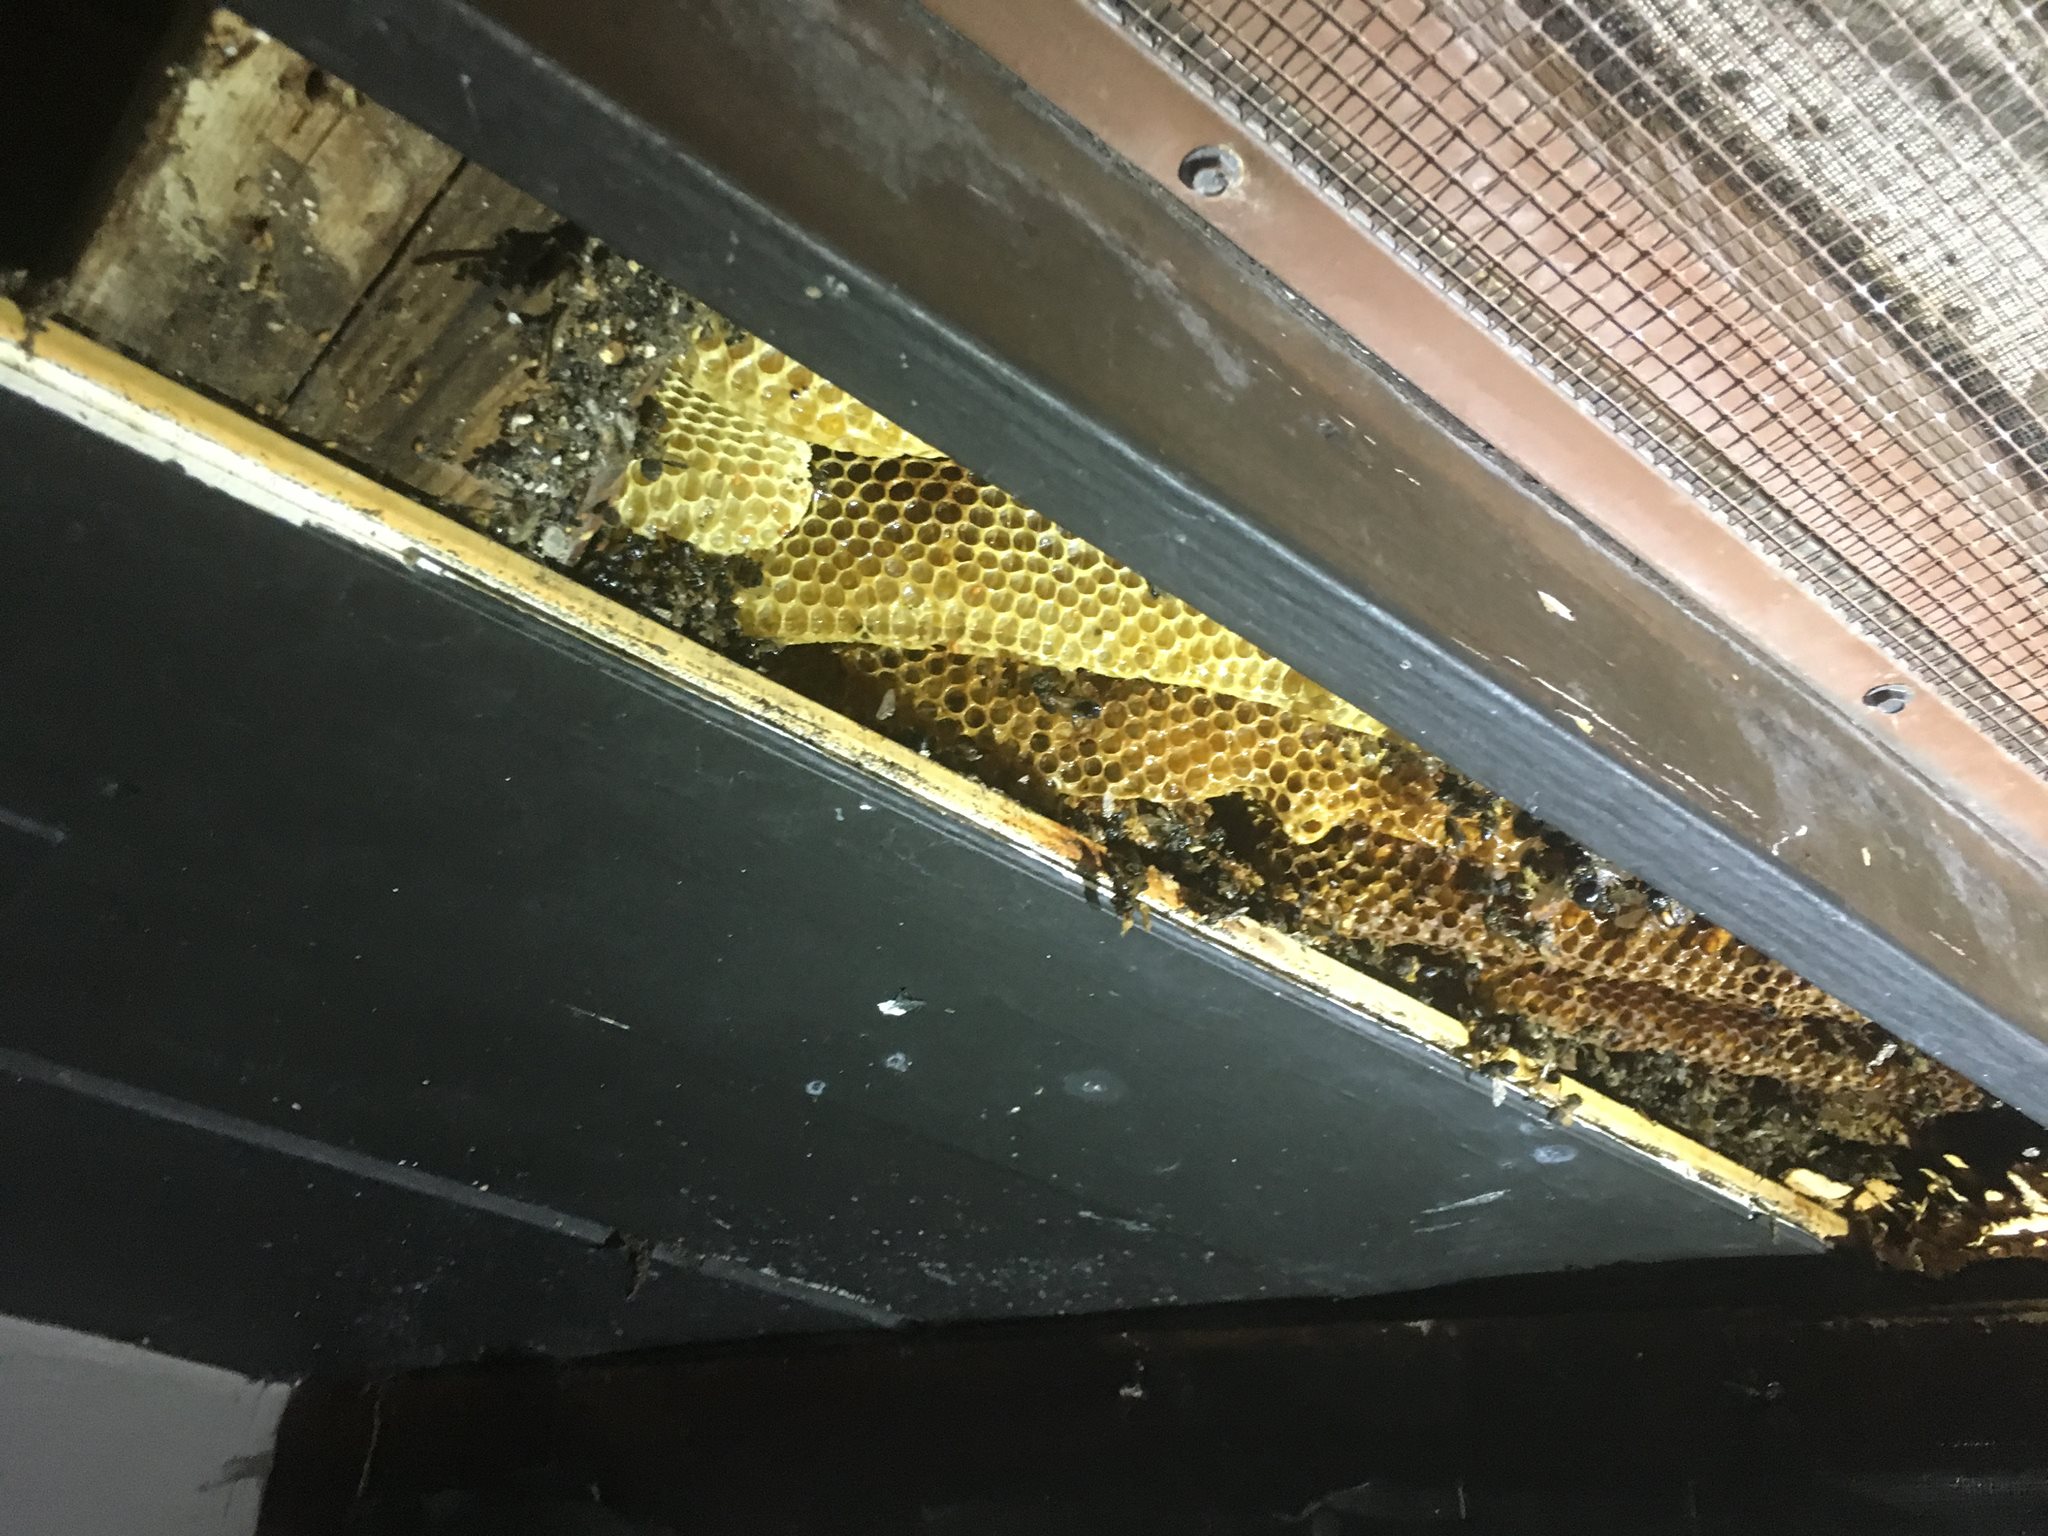 image of found bee hive in ceiling